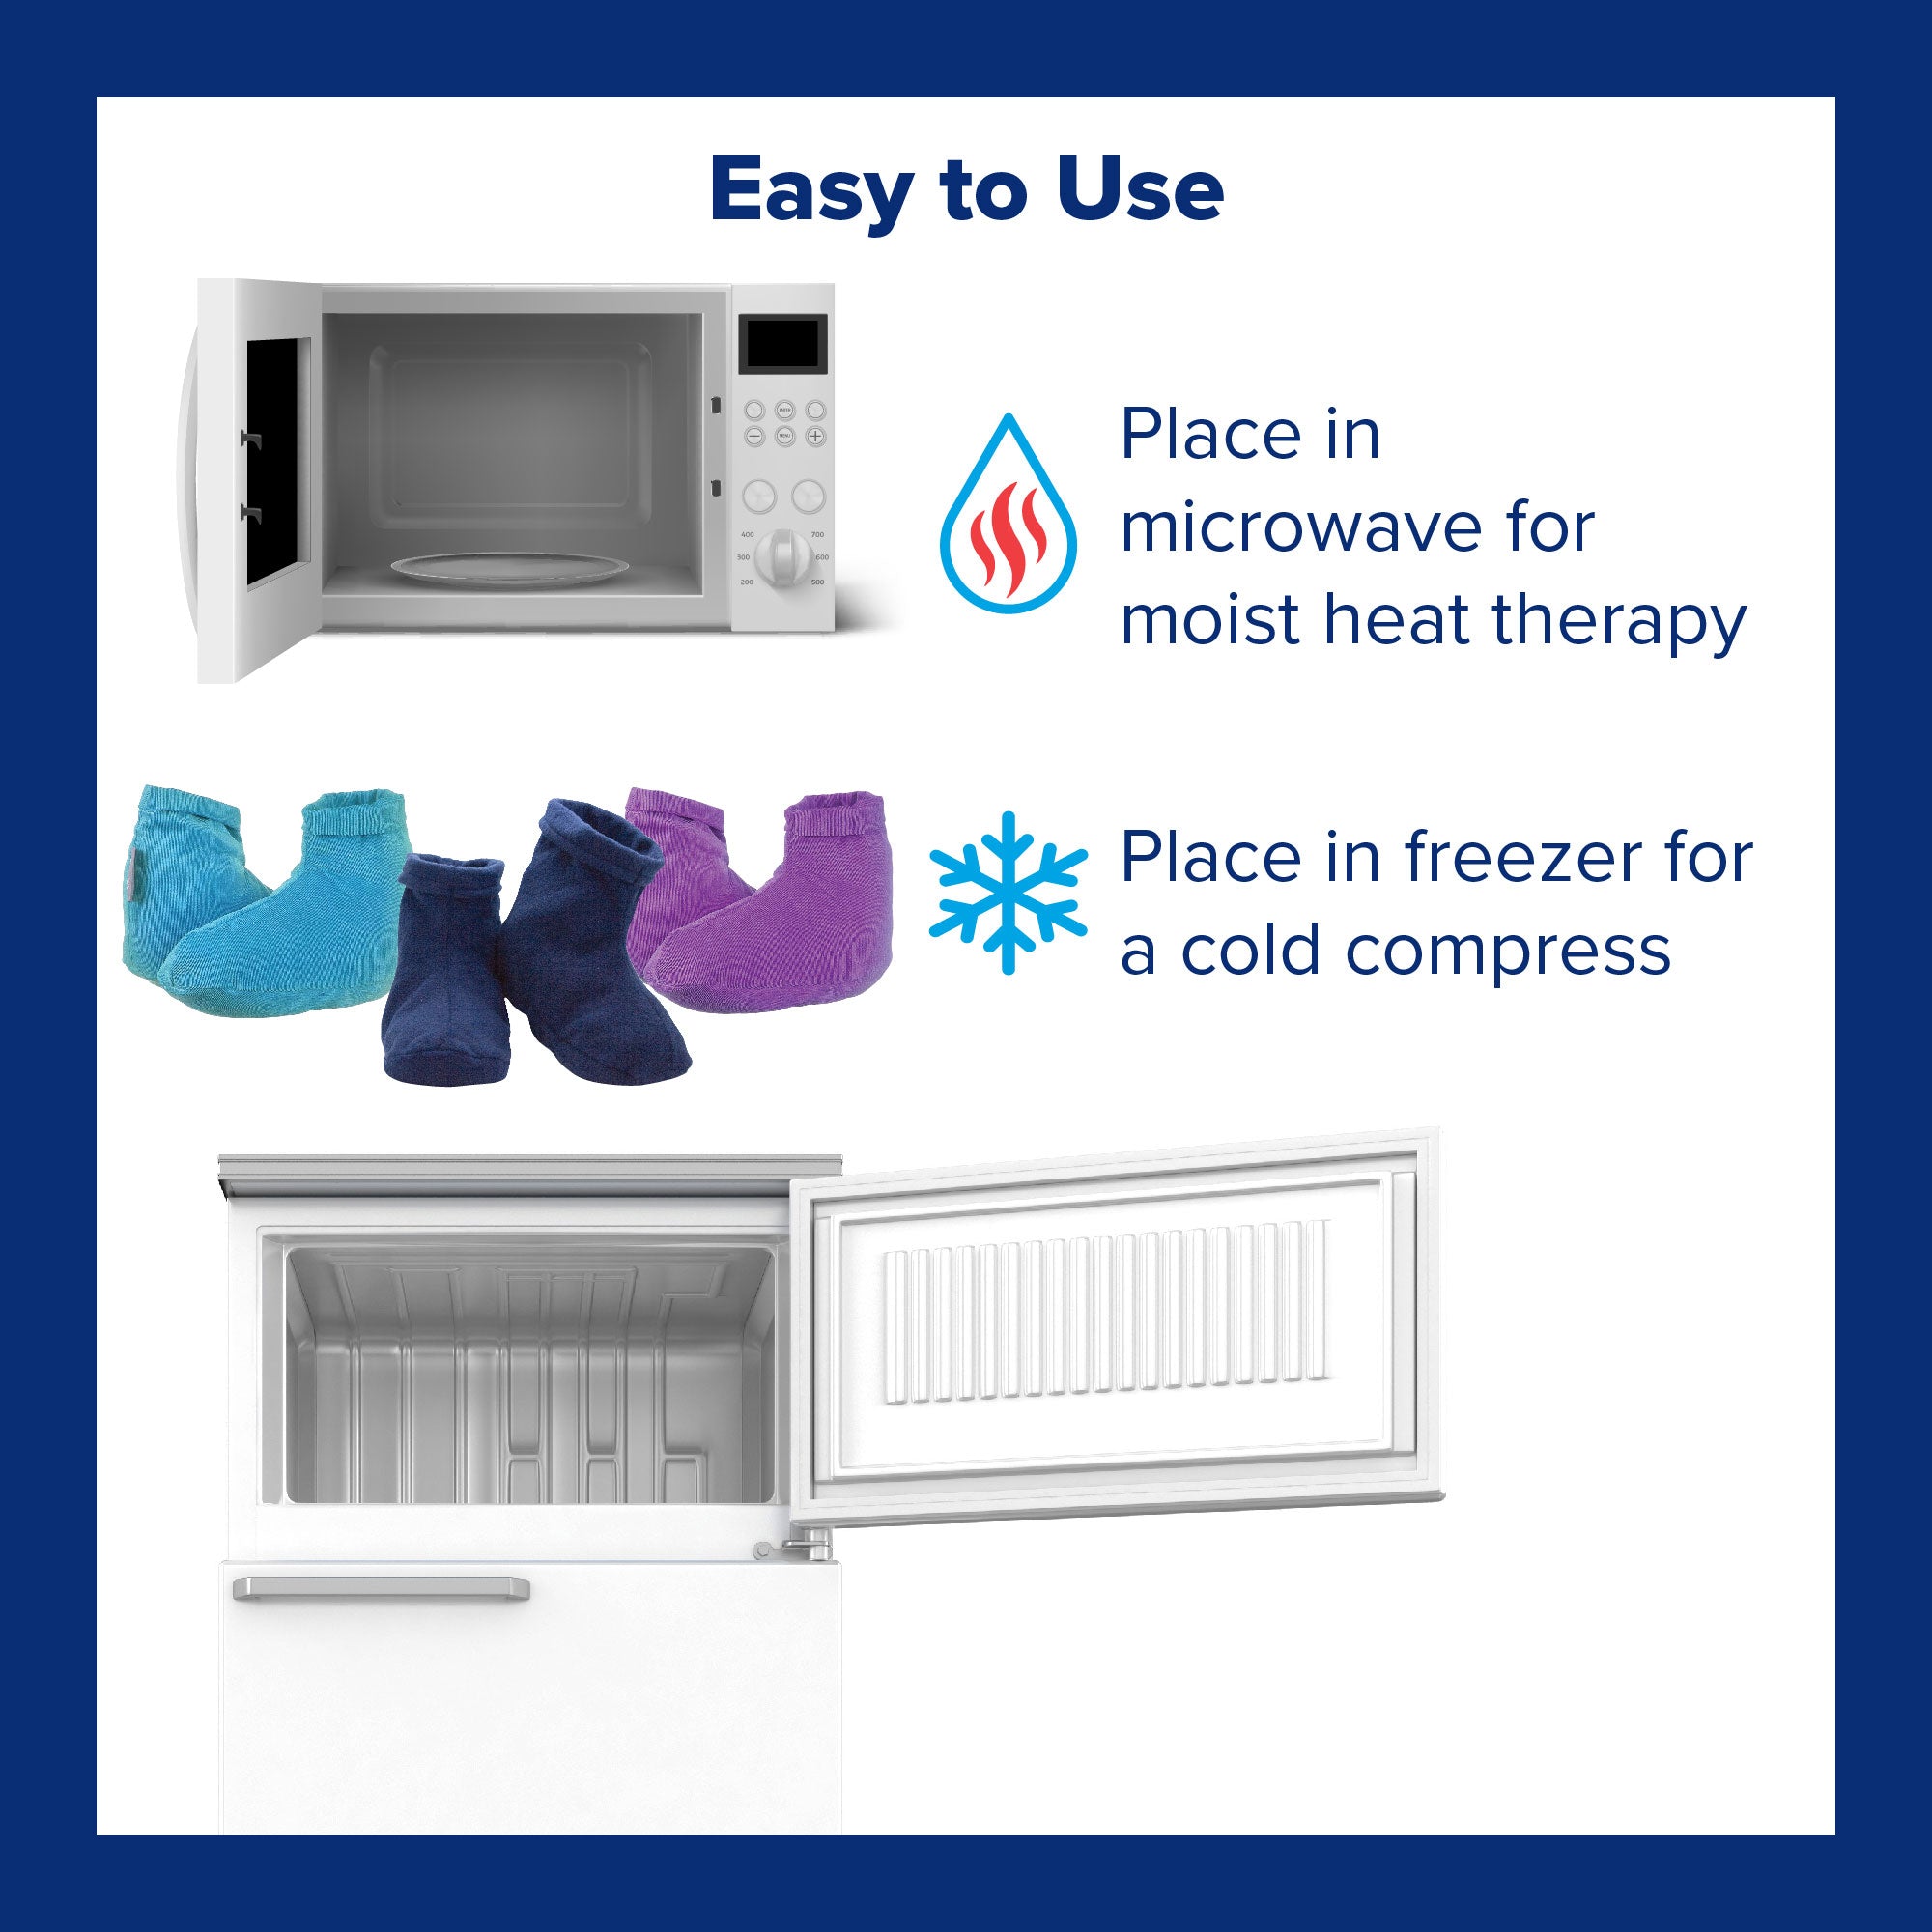 An image of foot warmers next to a microwave and freezer. Text, 